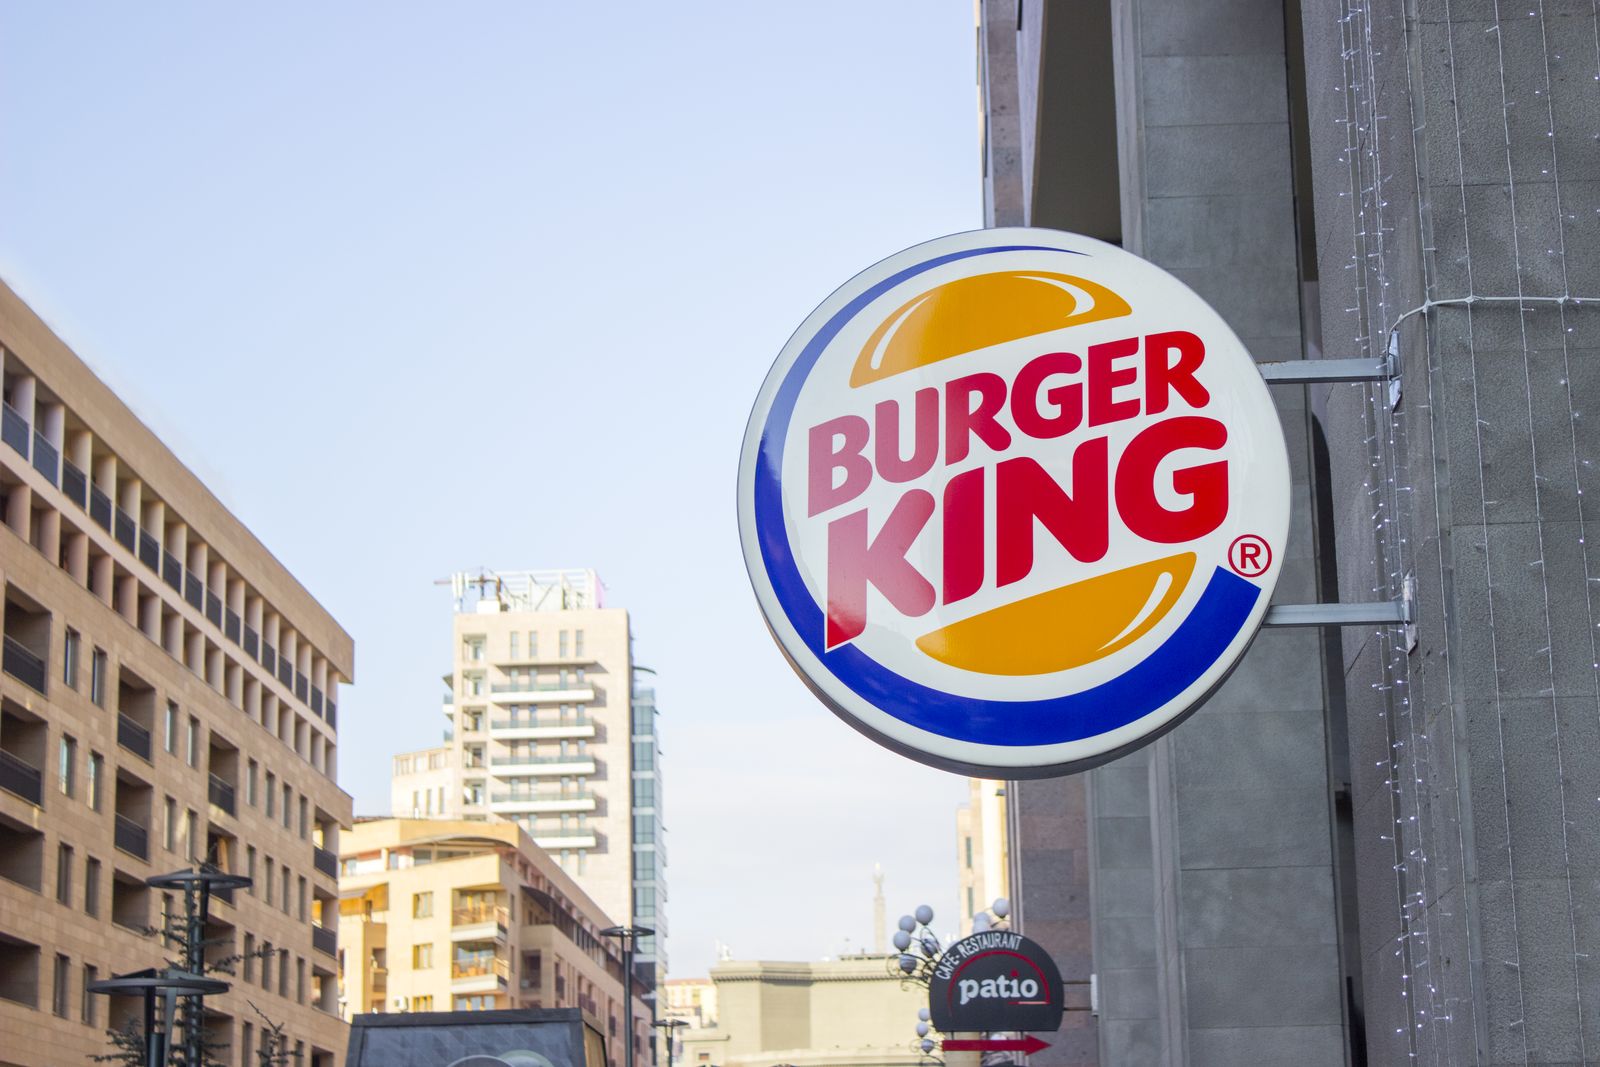 Burger King outdoor light box with the company name and logo made of acrylic and aluminum